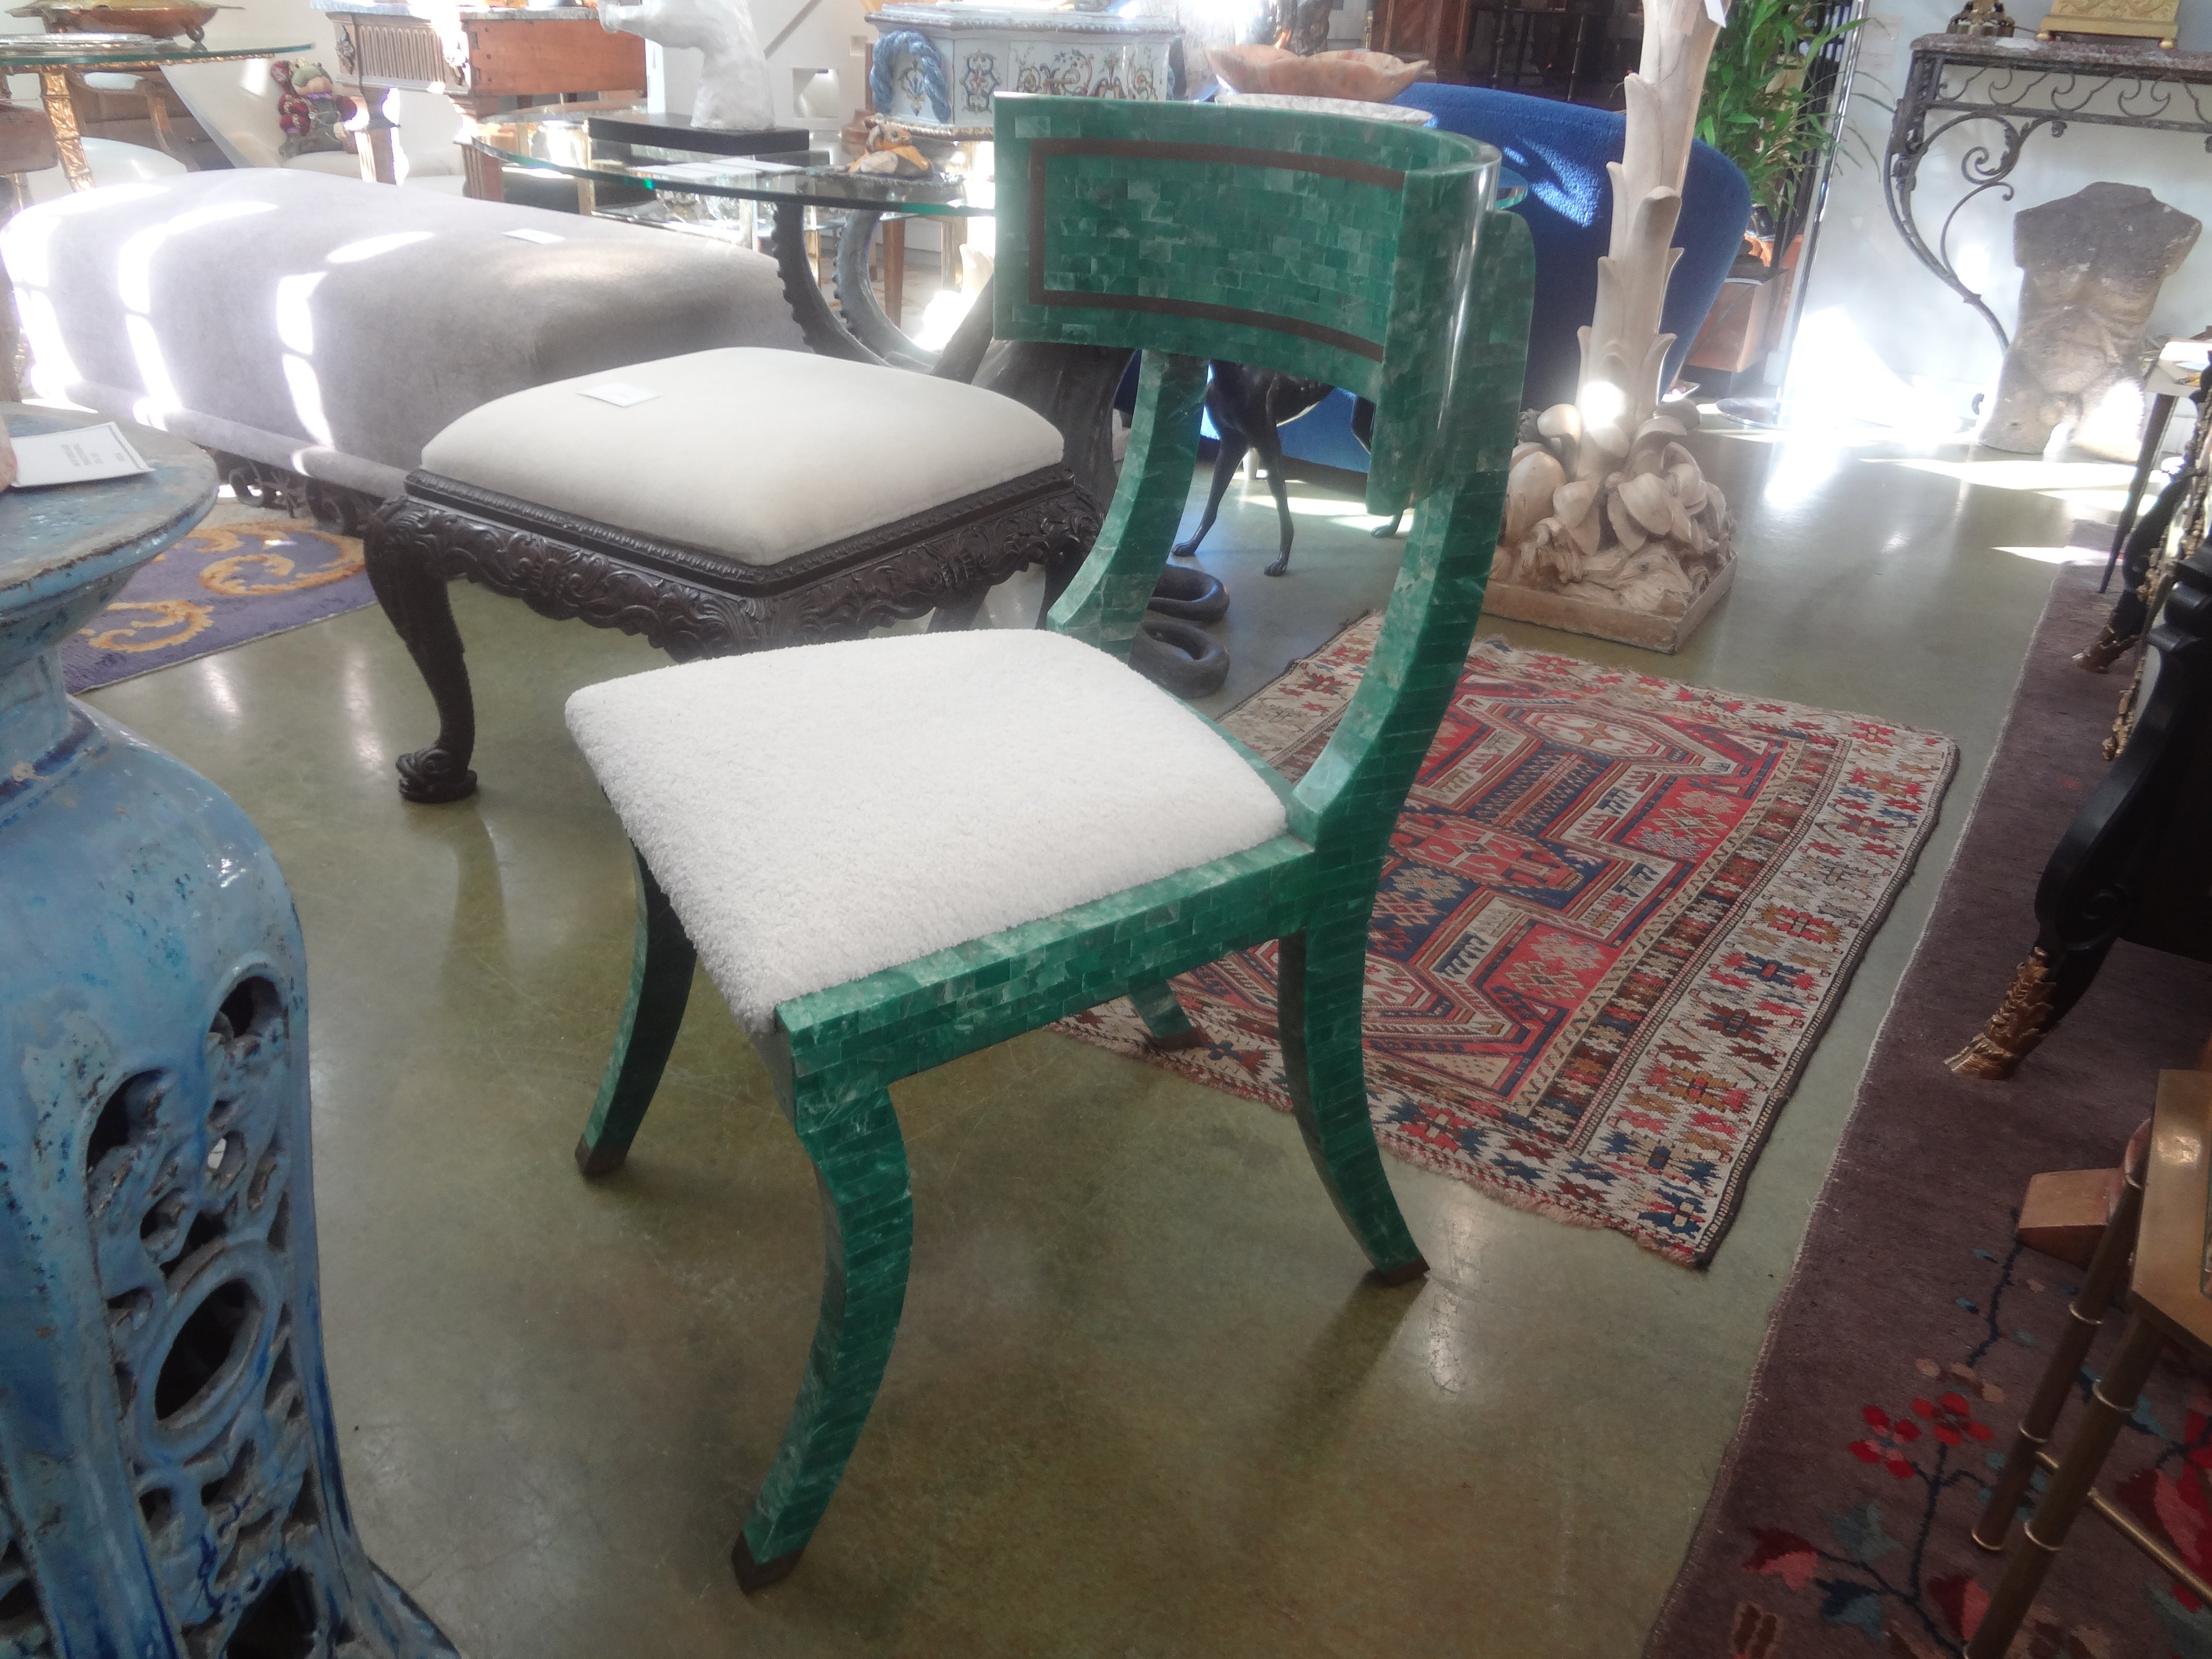 Vintage Maitland Smith Tessellated Stone Klismos Chair.
This unusual Maitland-Smith tessellated stone Klismos chair, side chair, desk chair, office chair or vanity chair is beautifully designed in a gorgeous tessellated green stone with brass trim